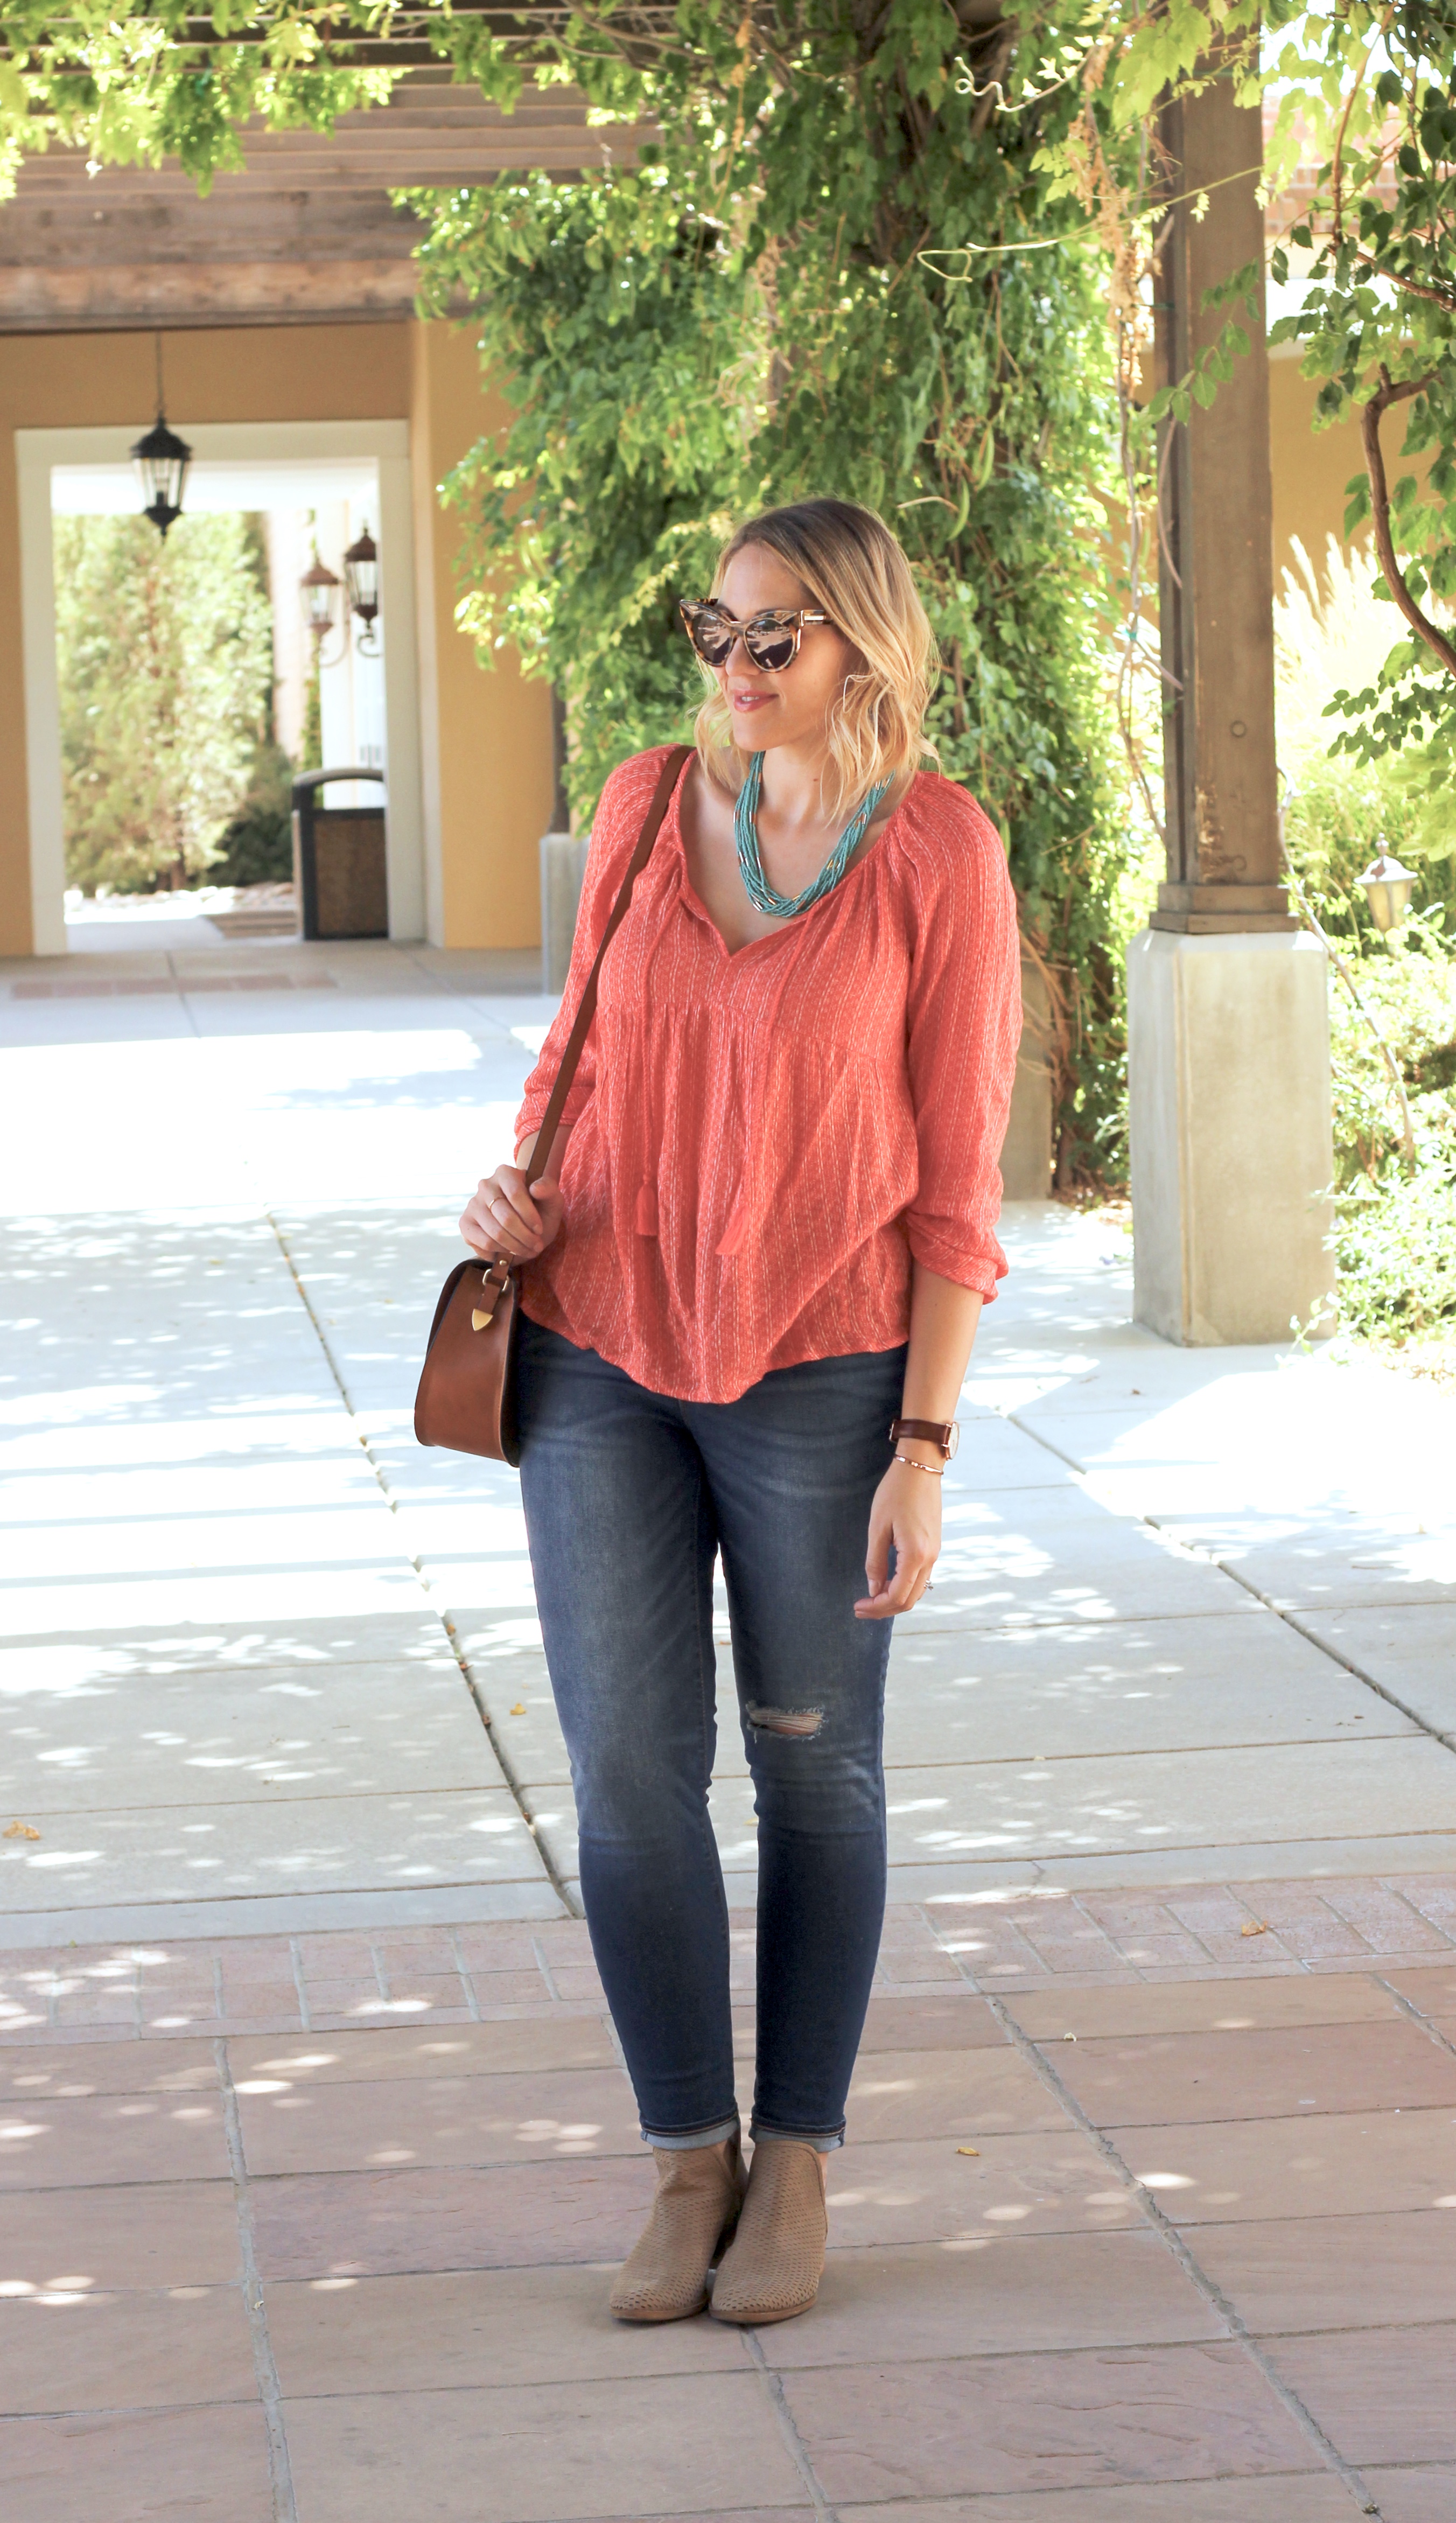 50 styles 50 states with old navy new mexico 